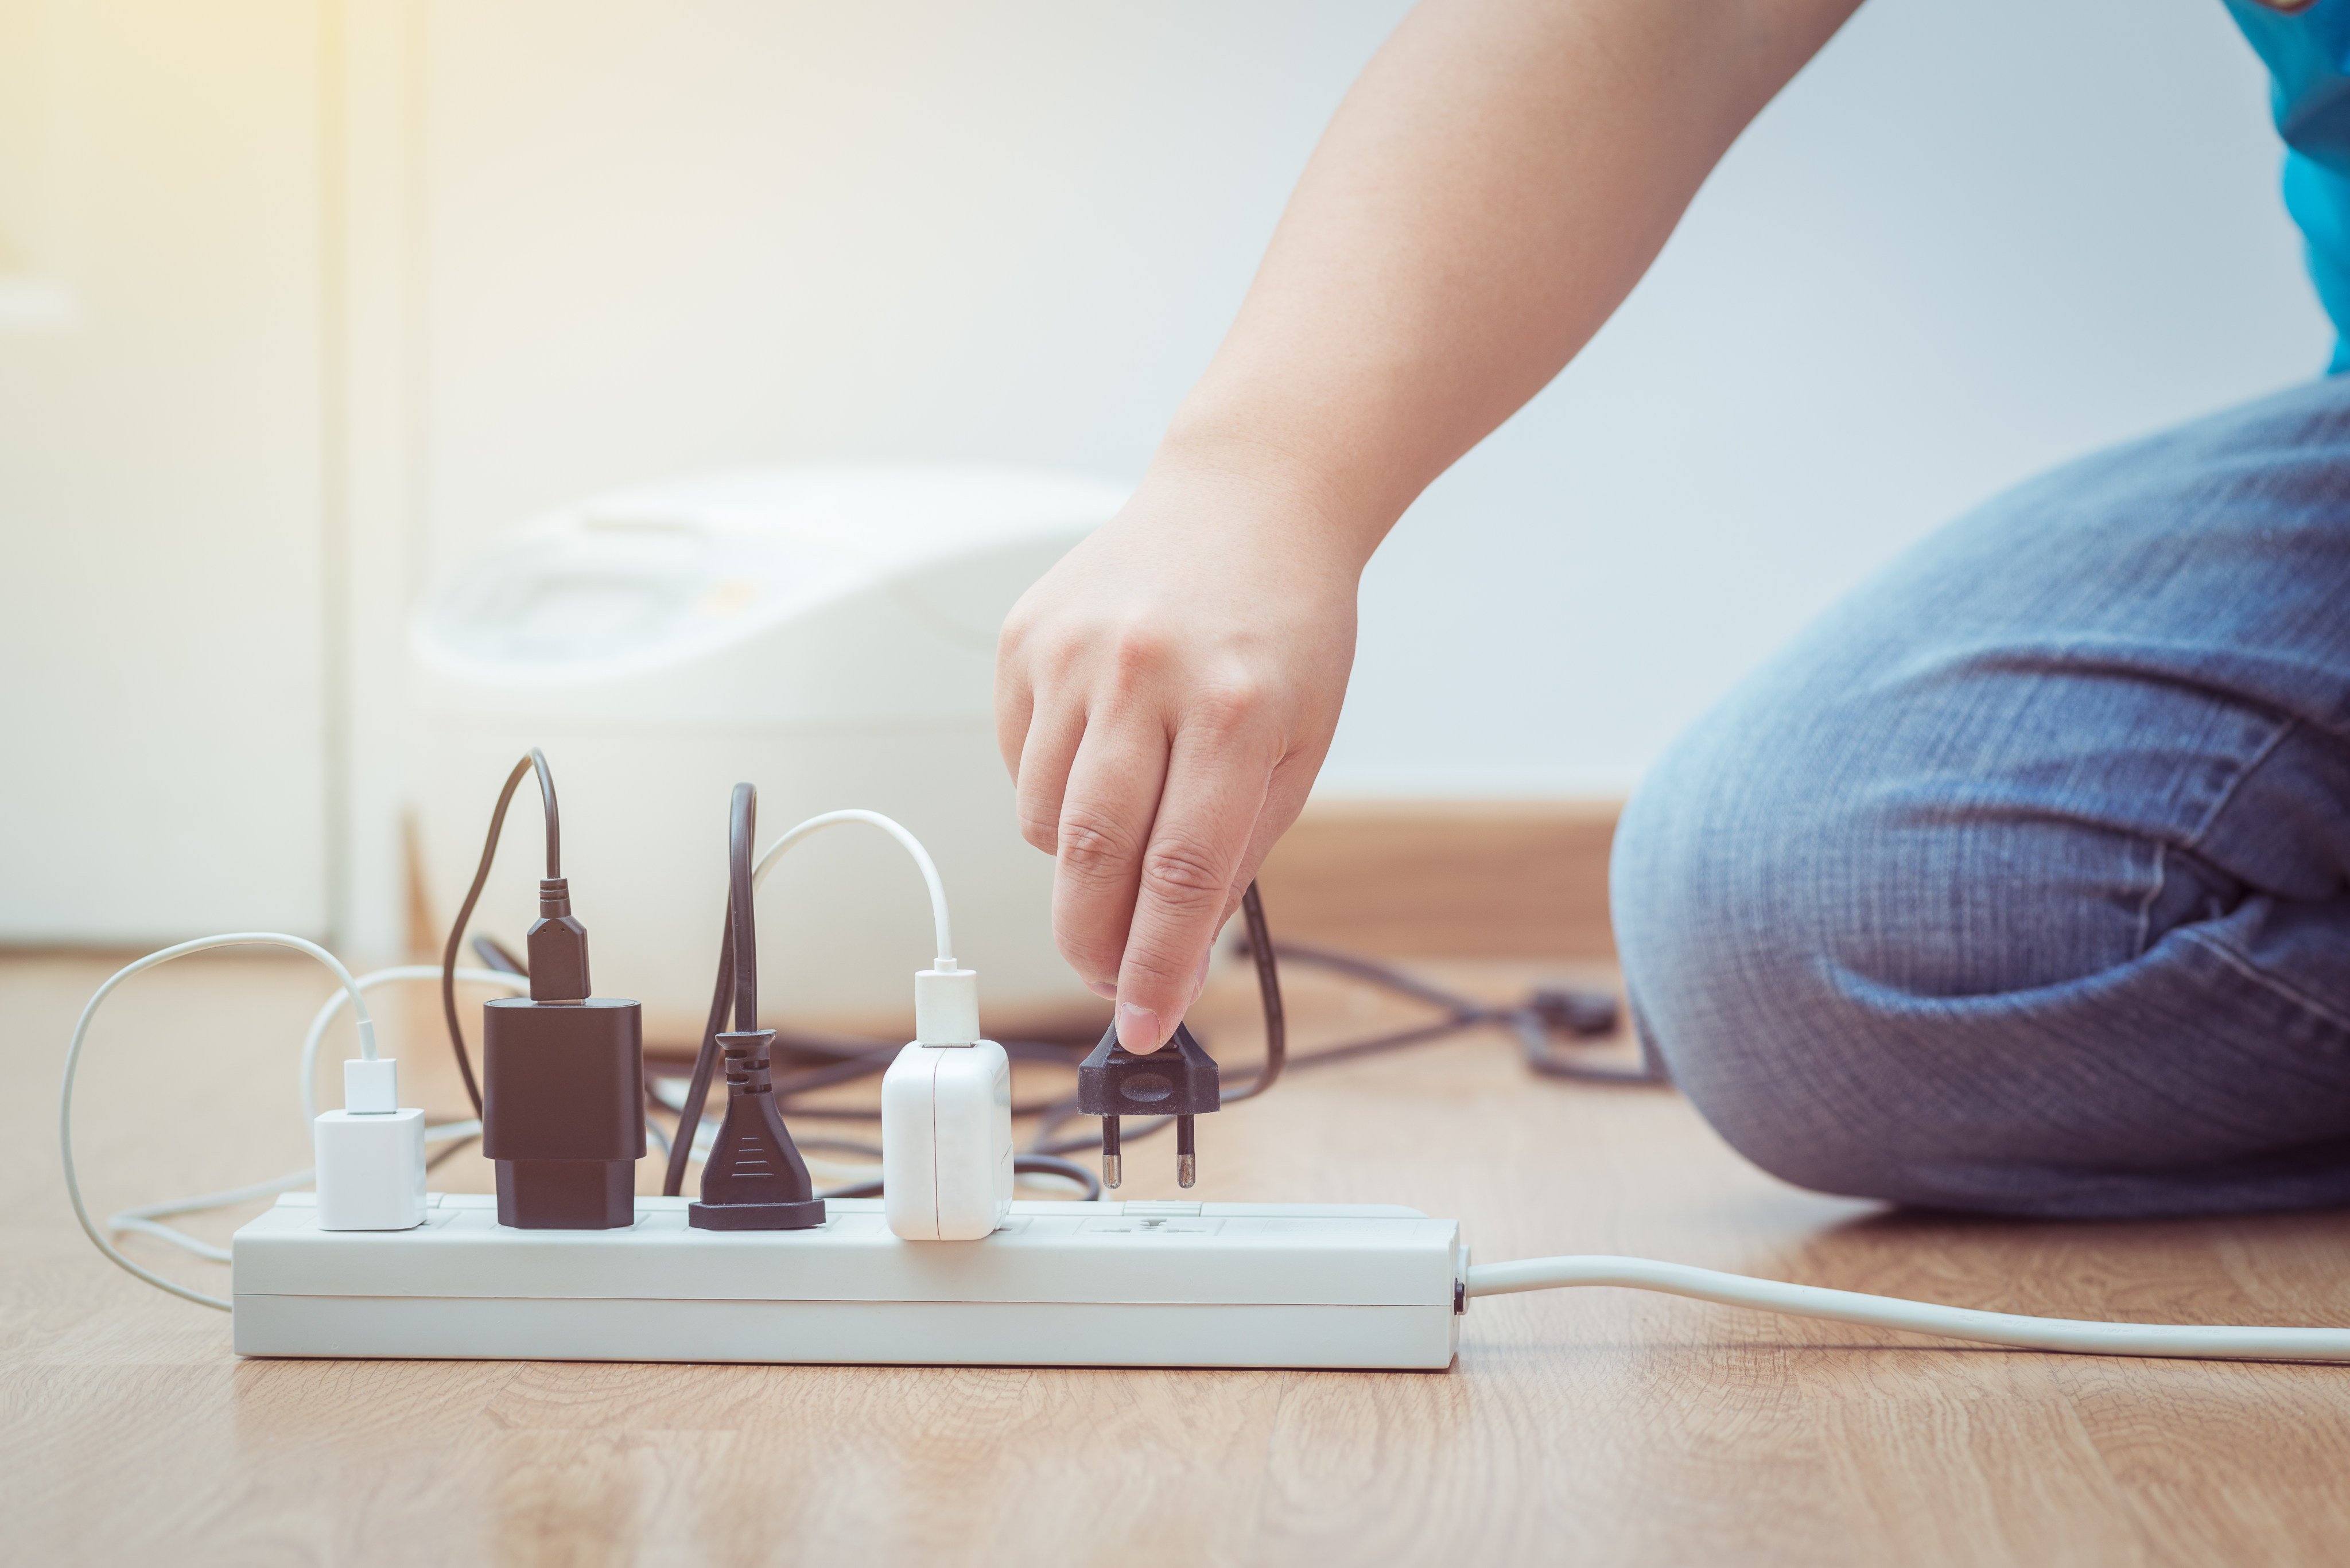 That there is still no standardised power socket is one of the mysteries of the modern world. China’s First Emperor was all about standardisation – he introduced the universal Chinese writing system that is still in use today. To resolve the issue, a multipronged approach is needed. Photo: Shutterstock